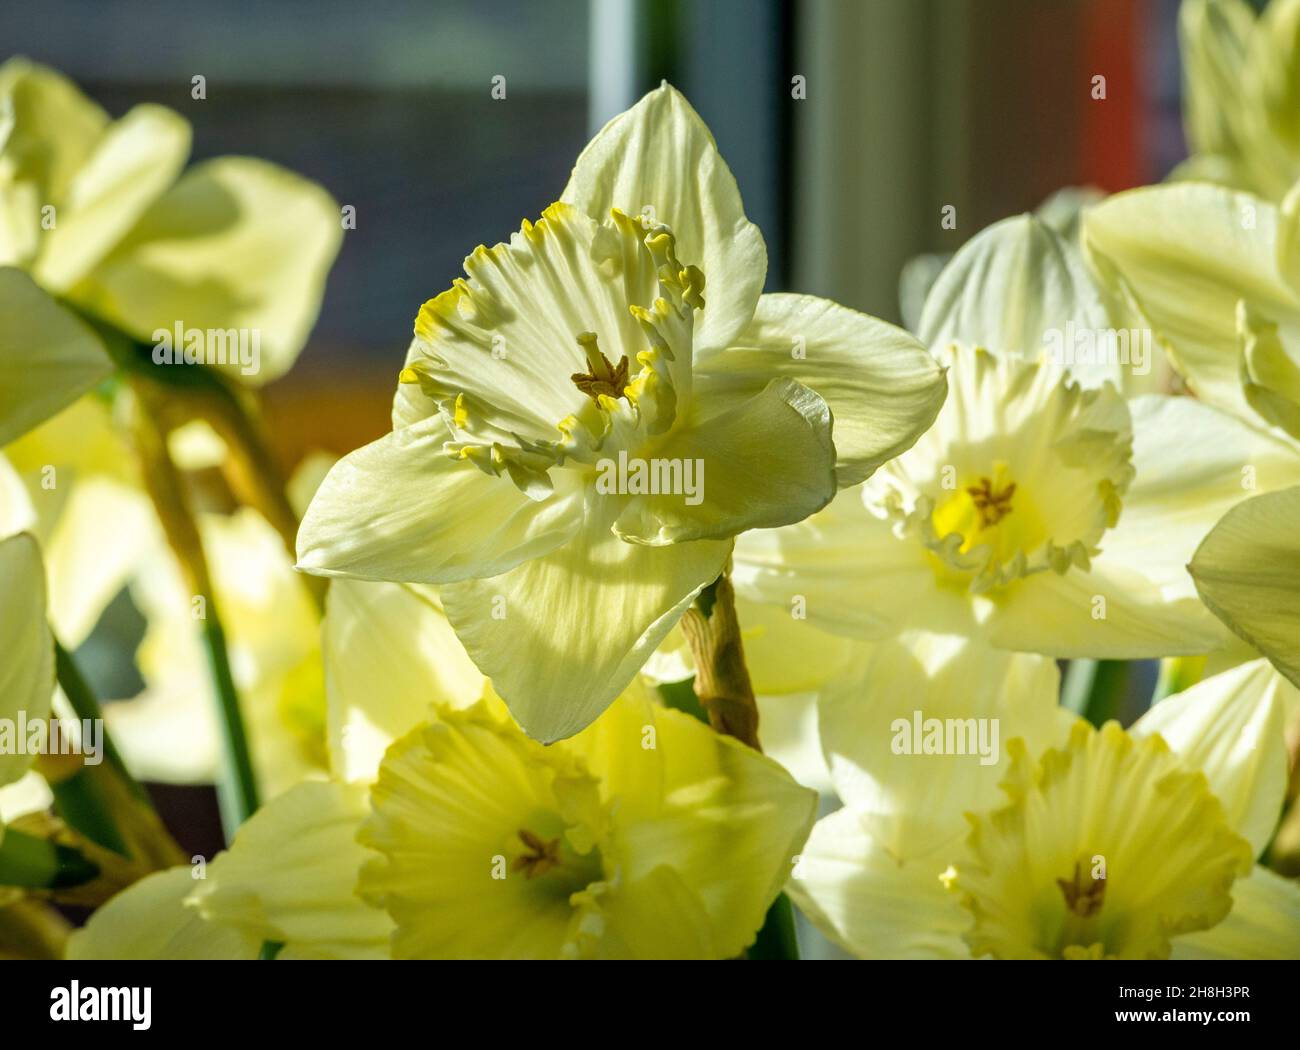 Narcissus is a genus of predominantly spring flowering perennial plants of the amaryllis family, Amaryllidaceae. Various common names including daffod Stock Photo